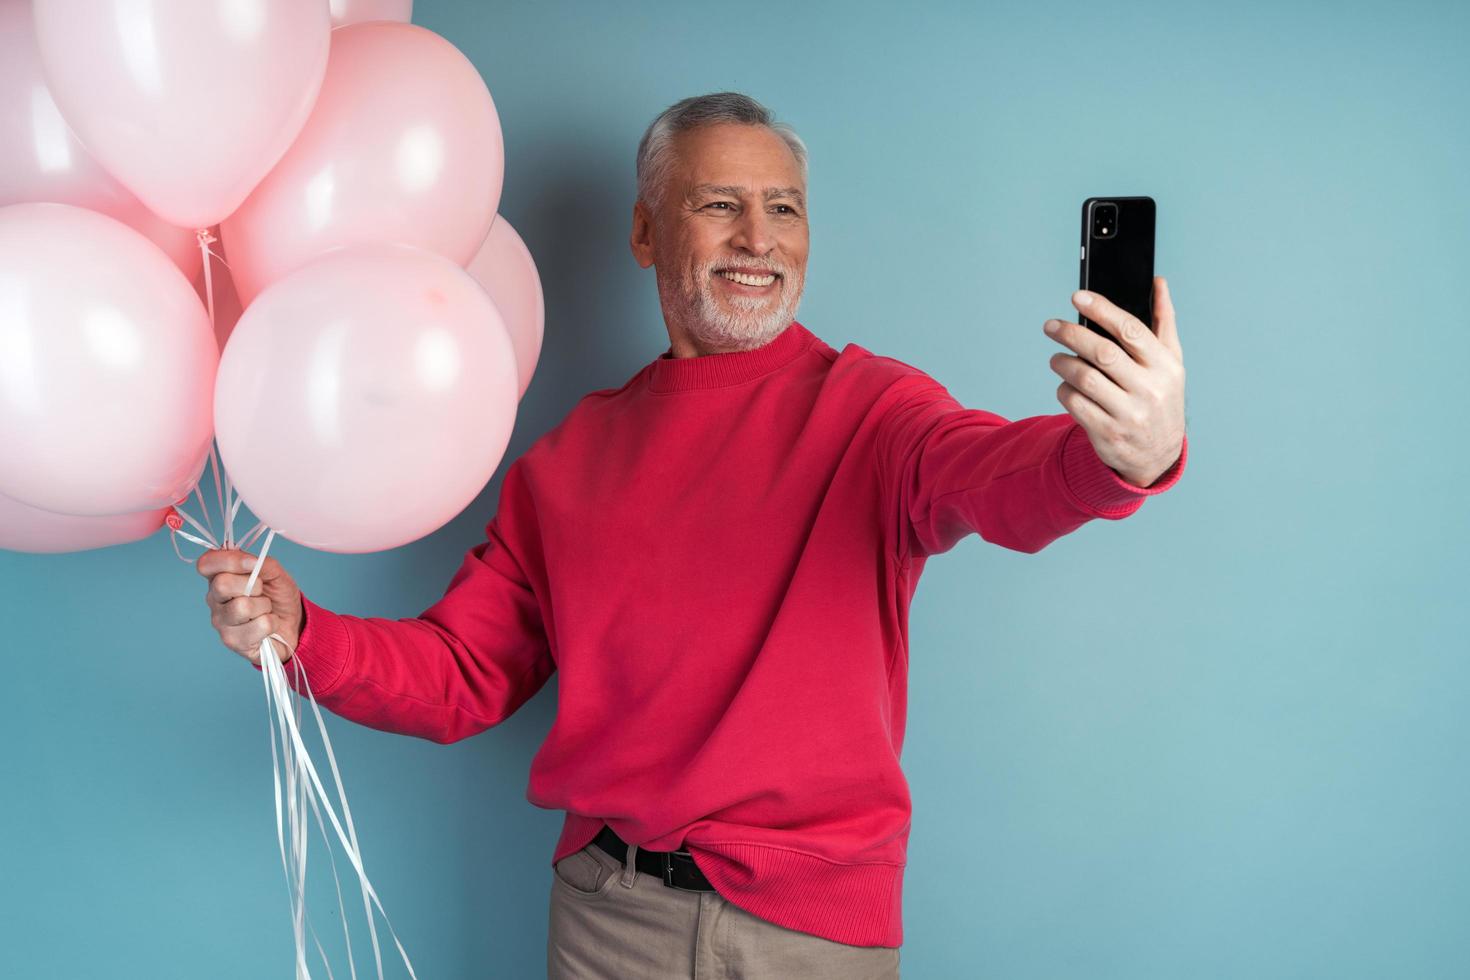 Attractive senior man holds balloons and takes a selfie photo